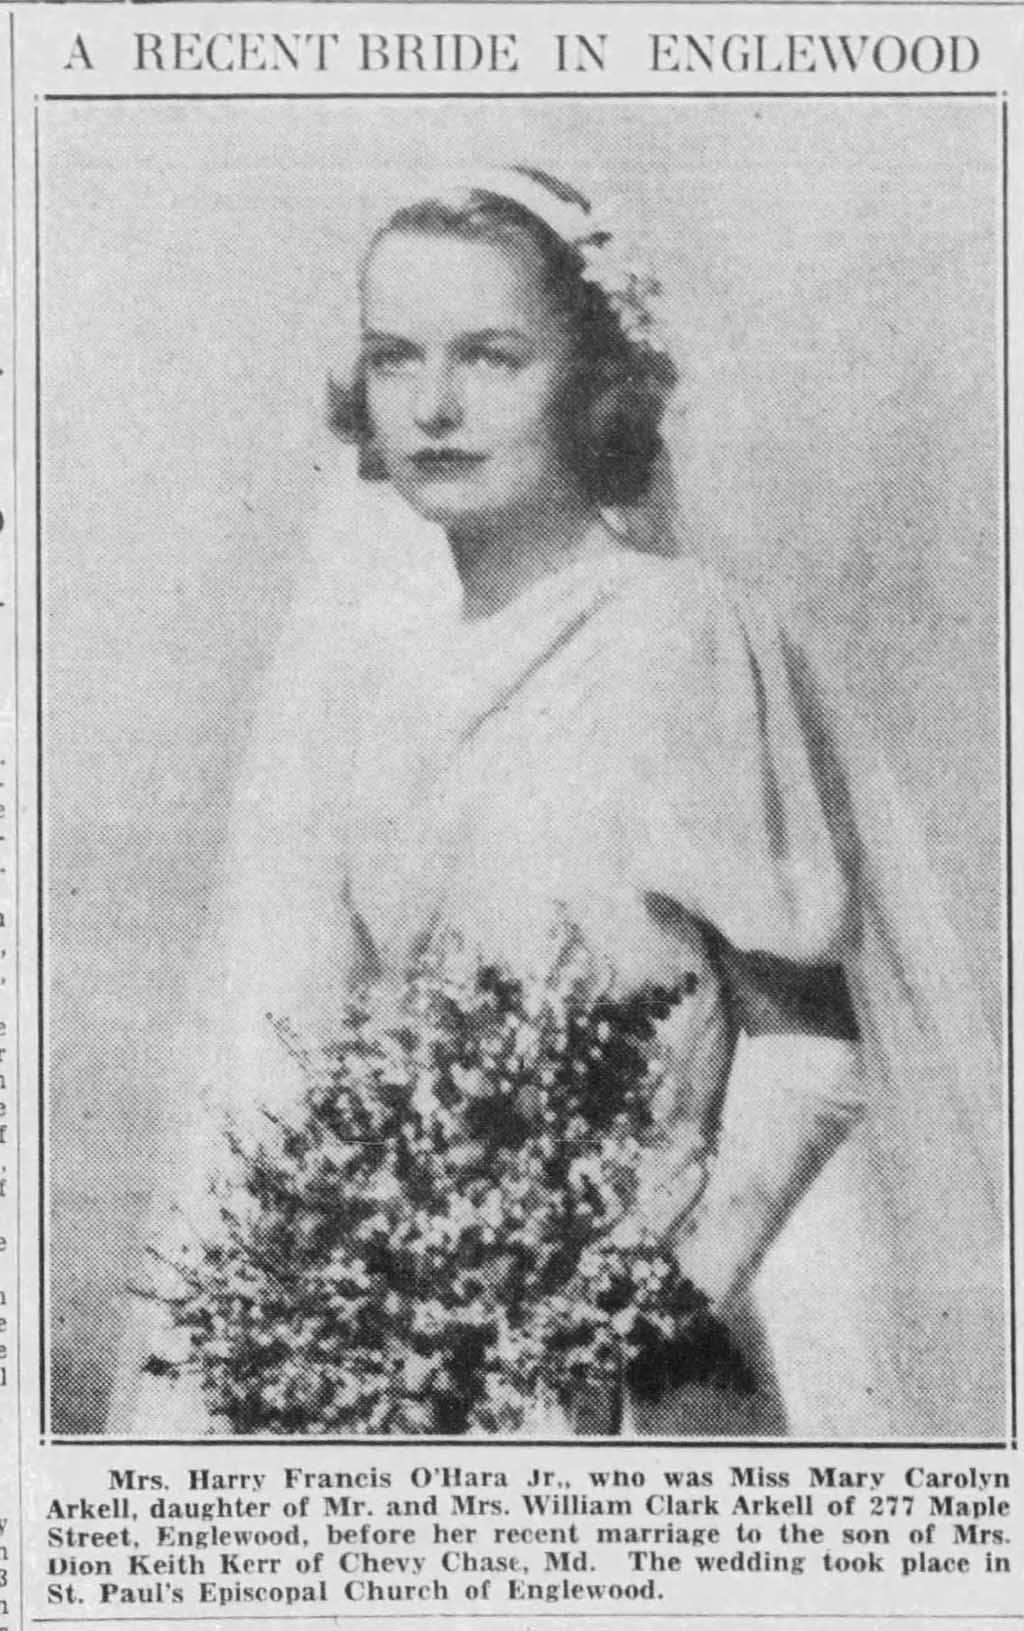 A photograph of a young woman in a wedding dress with clean lines holding a bouquet of flowers.